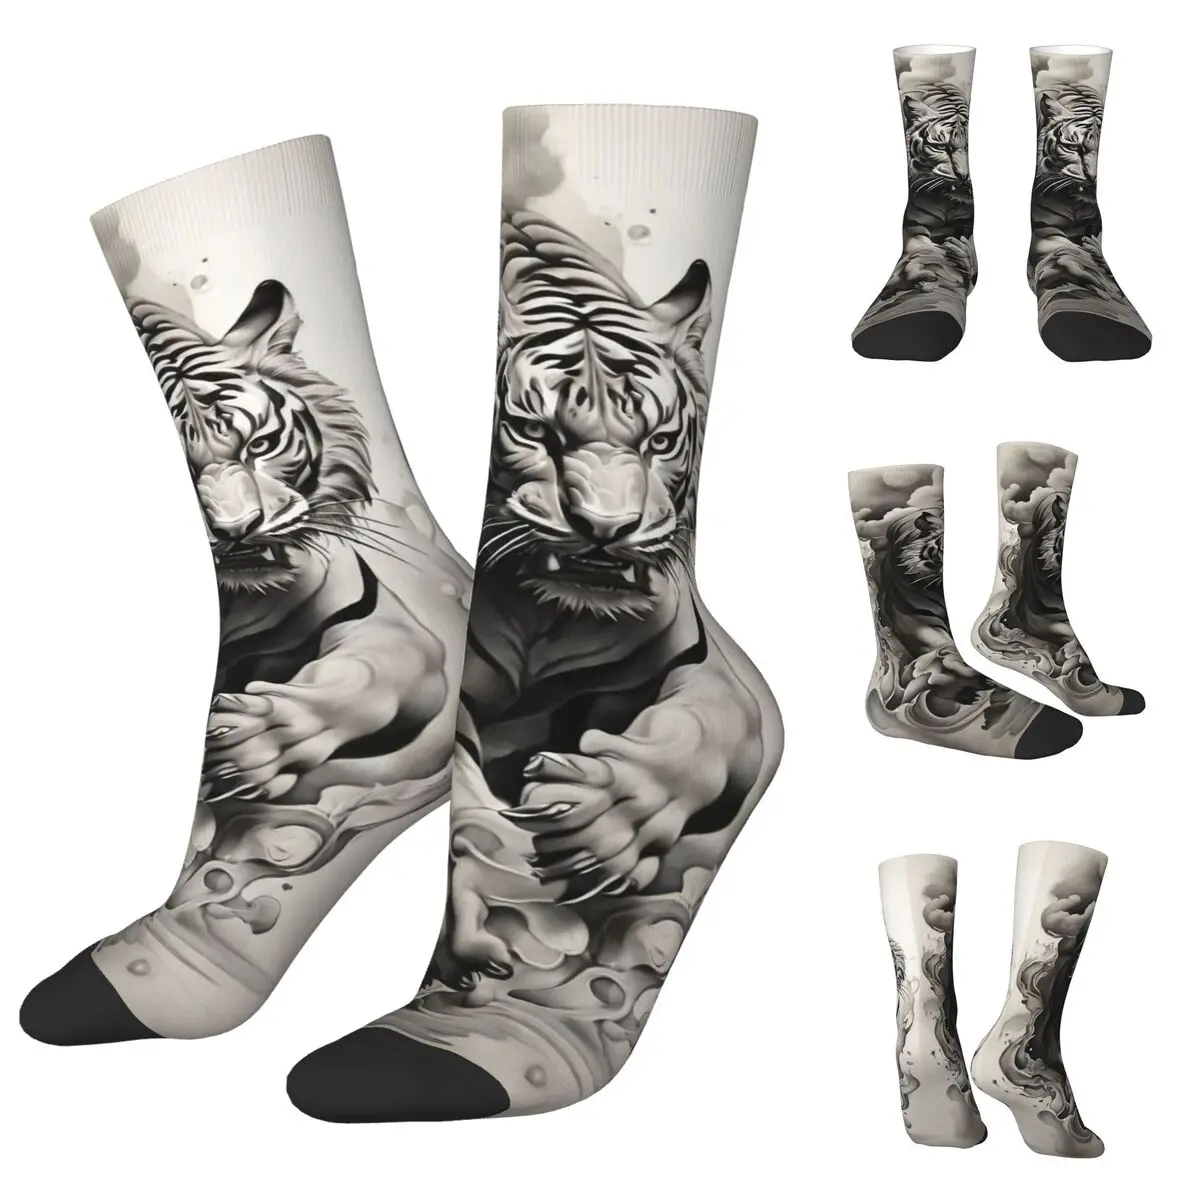 Cool Animals, Lions, Tigers, Gorillas Men Women Socks,Windproof Beautiful printing Suitable for all seasons Dressing Gifts to the lions